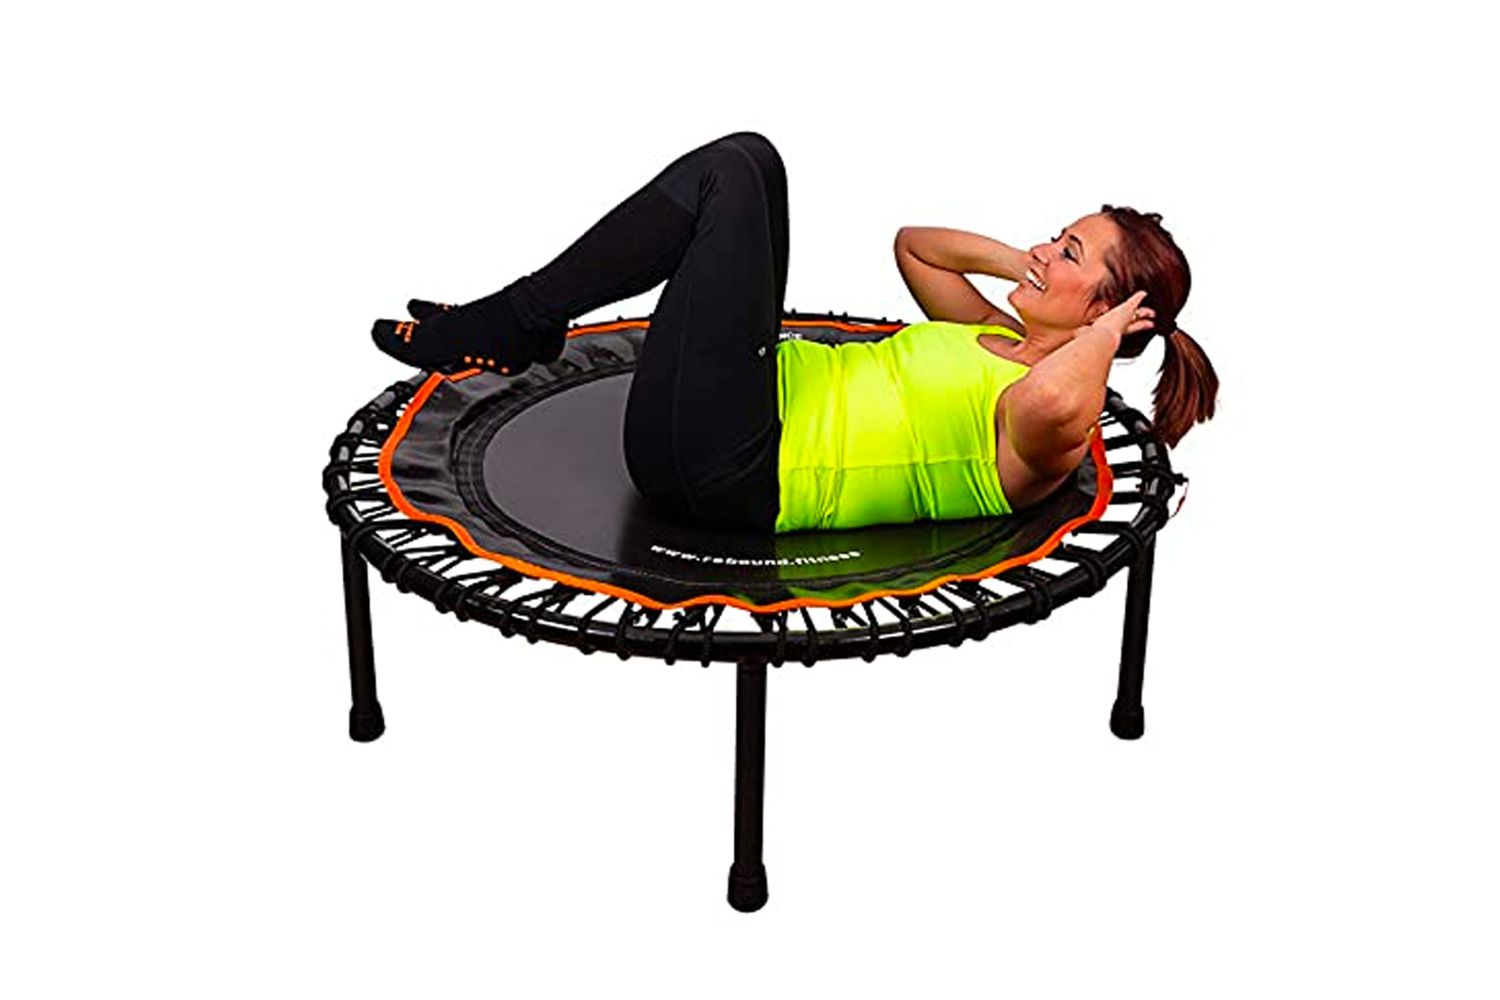 rebound-fitness-fitbounce-pro-usa-bungee-rebounder